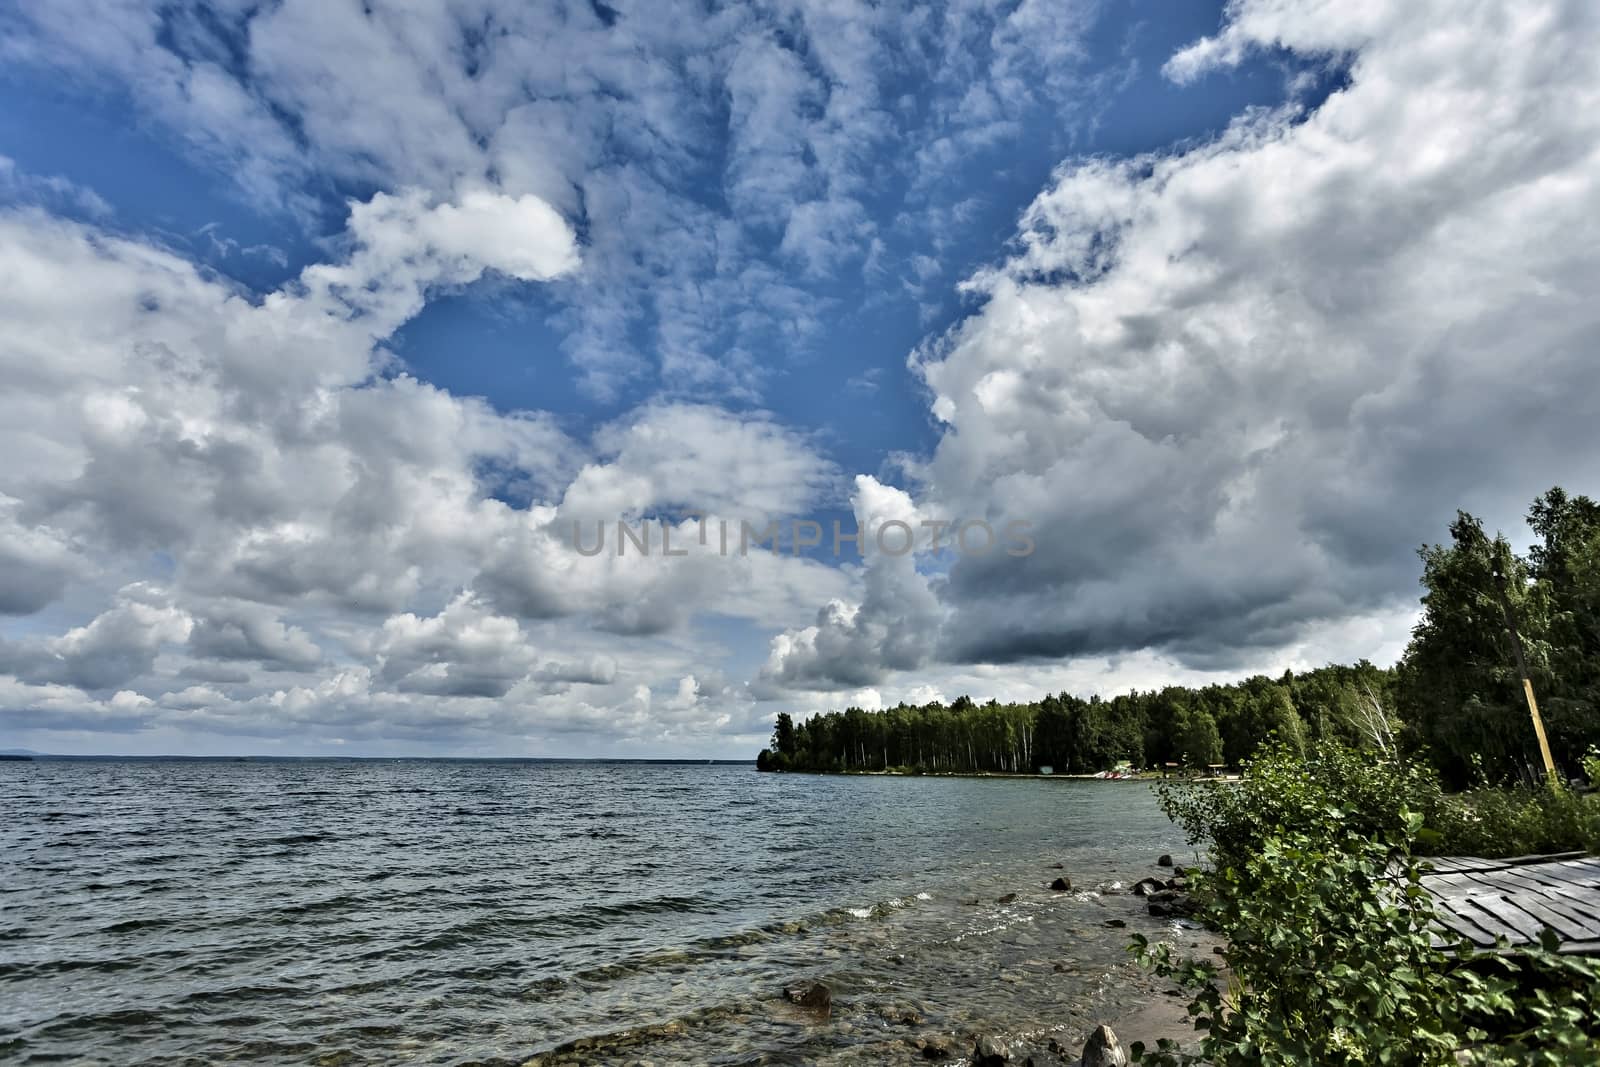 sky over the lake with cumulonimbus clouds illuminated by the sun, morning by valerypetr